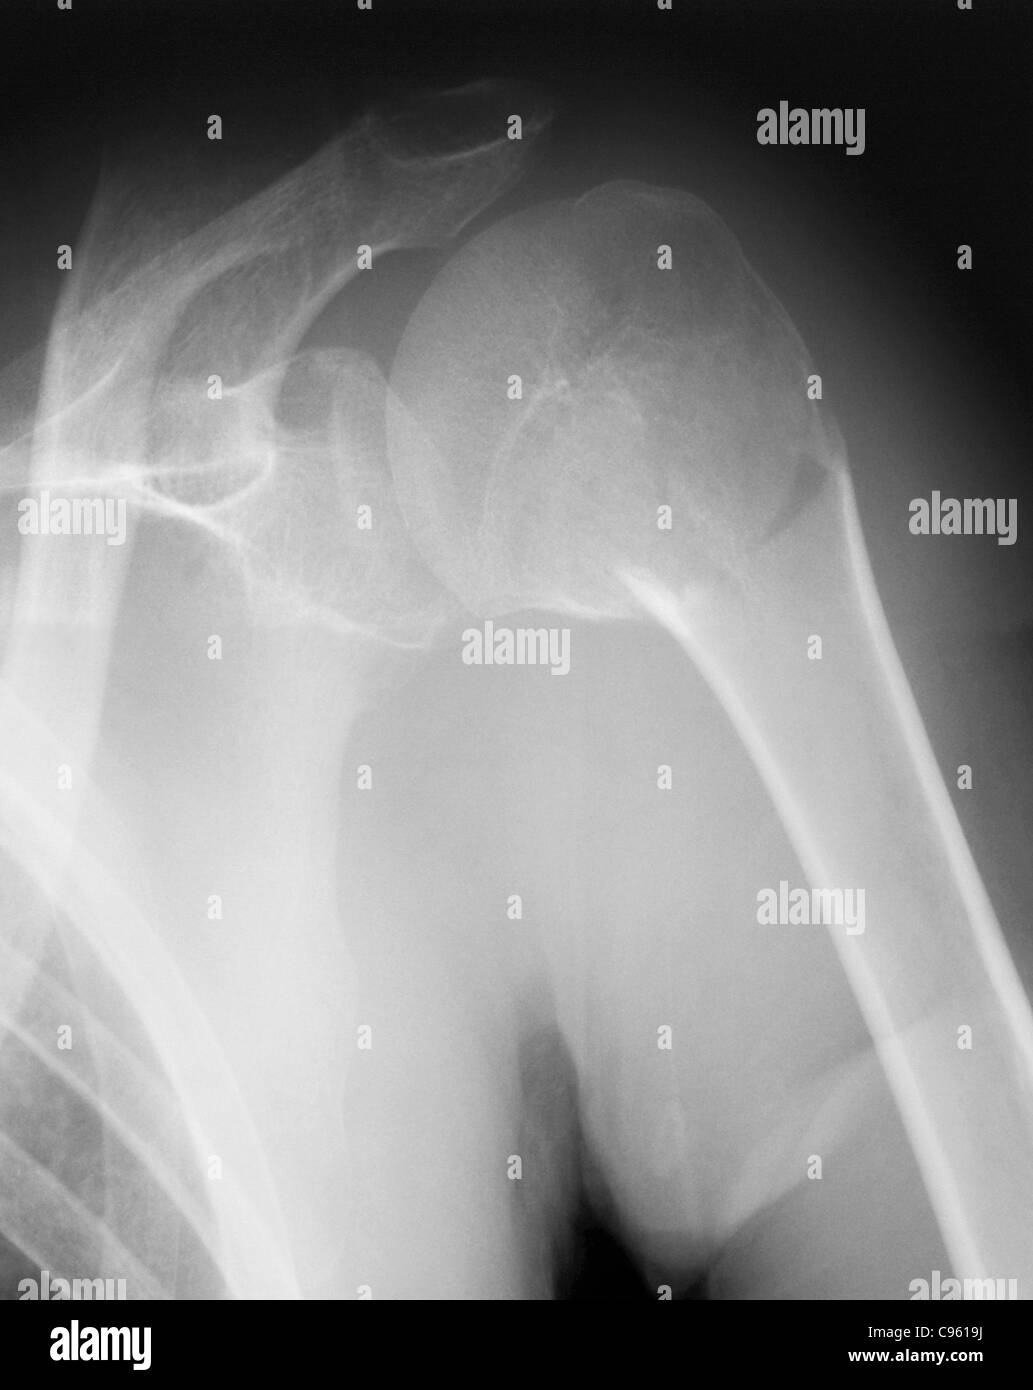 Broken shoulder. X-ray of the shoulder of a patient with a fracture in the neck of the humerus (upper arm bone). Stock Photo